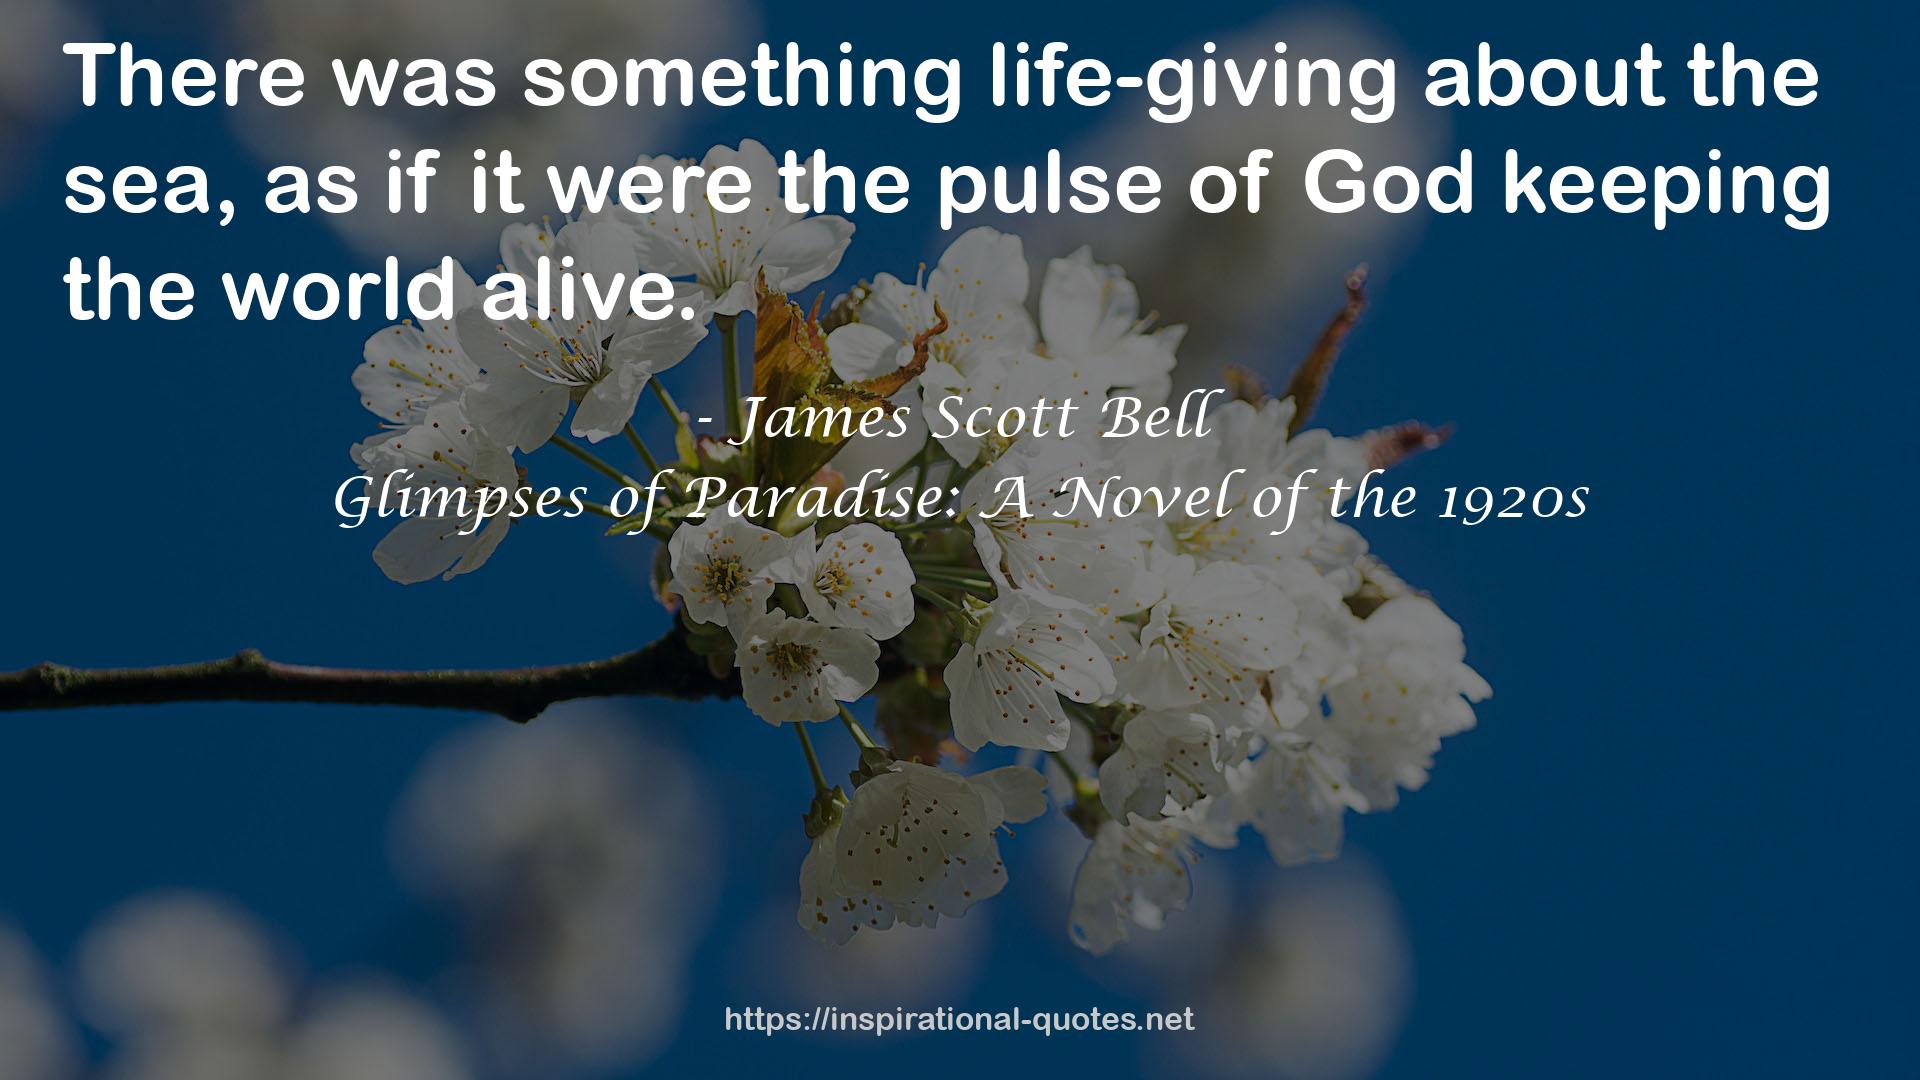 Glimpses of Paradise: A Novel of the 1920s QUOTES